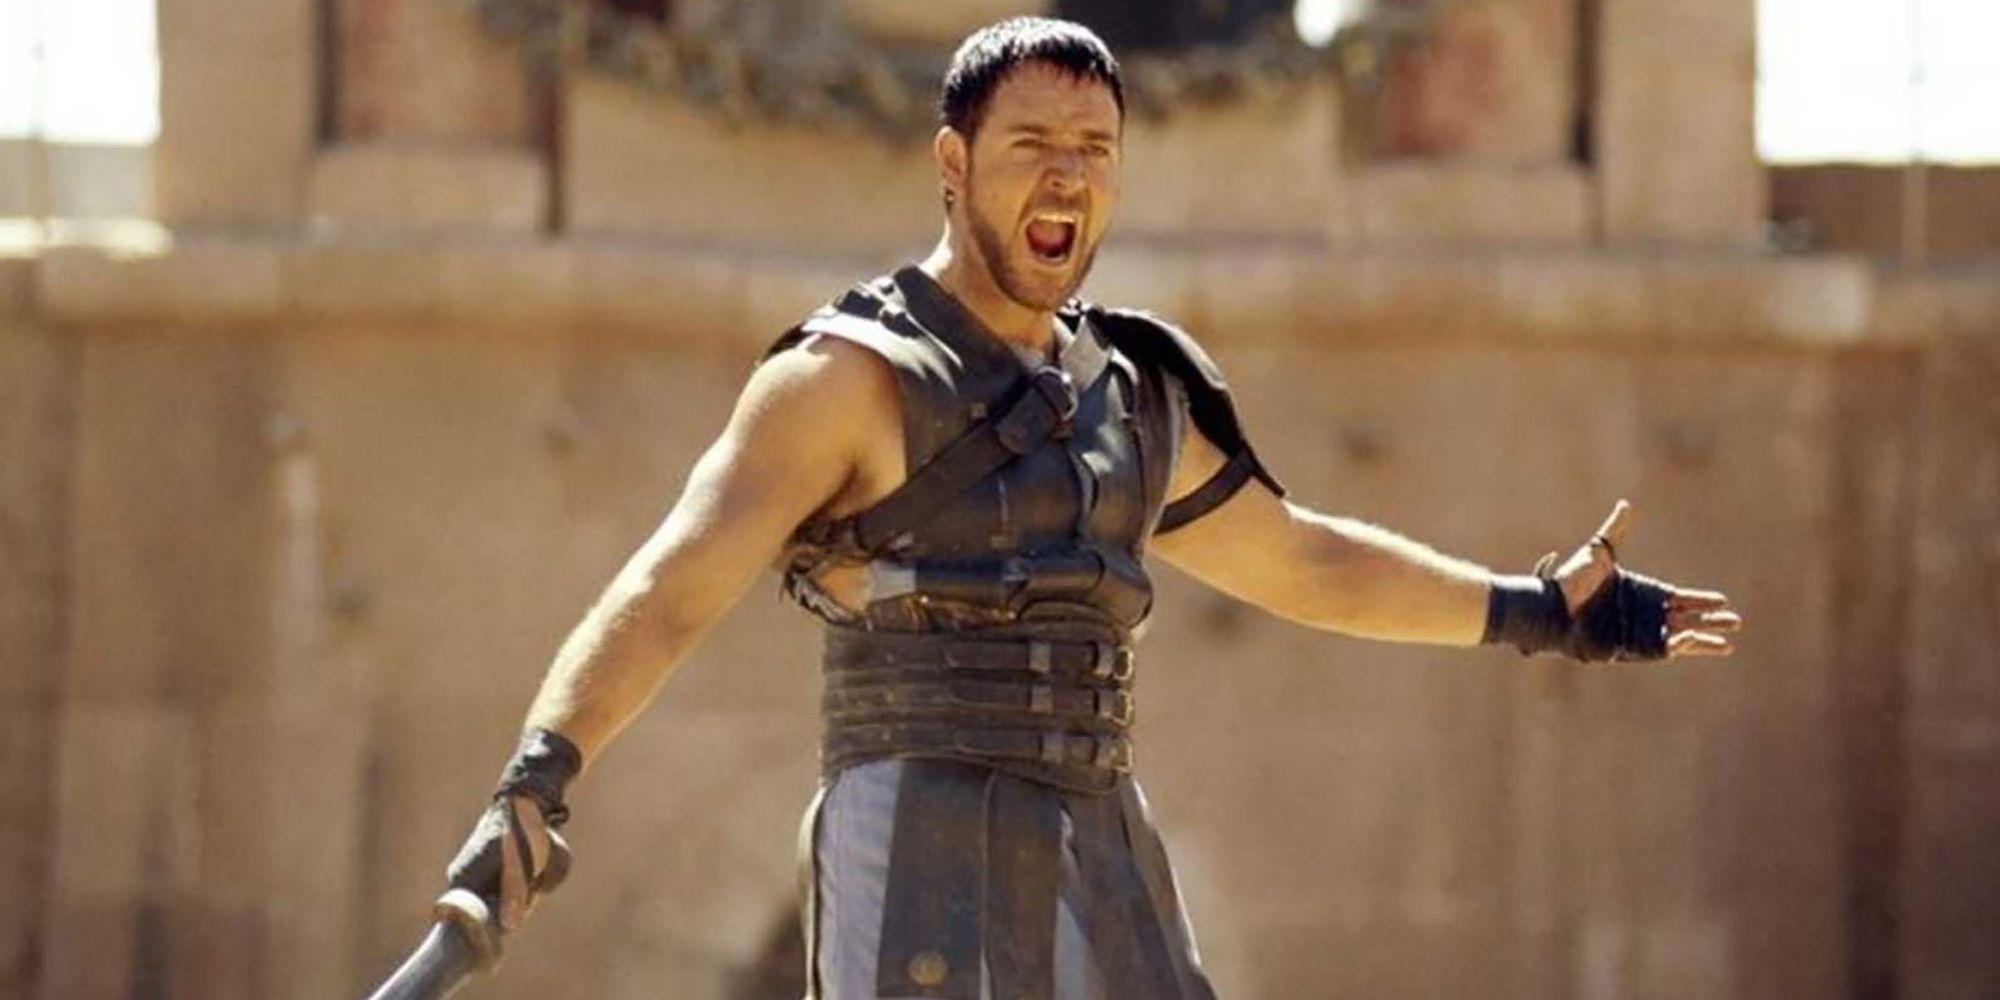 Russell Crowe as Maximus screaming in the arena in Gladiator